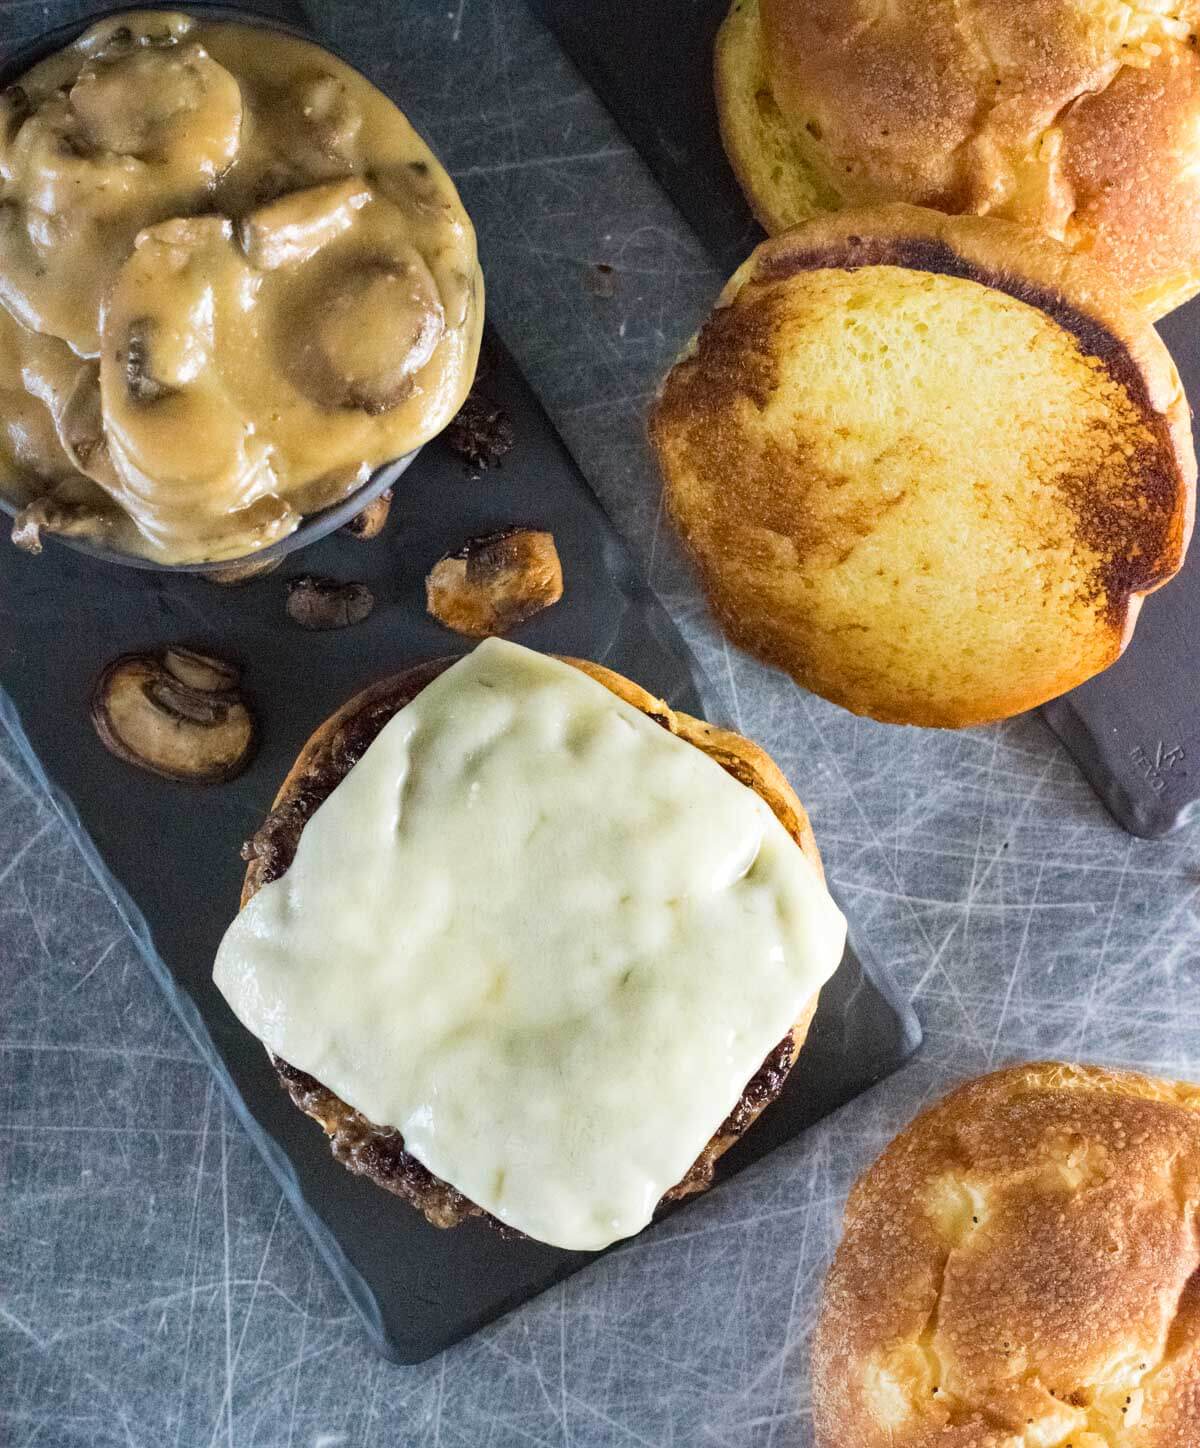 Mushroom burger with melted Swiss cheese and toasted bun viewed from above.